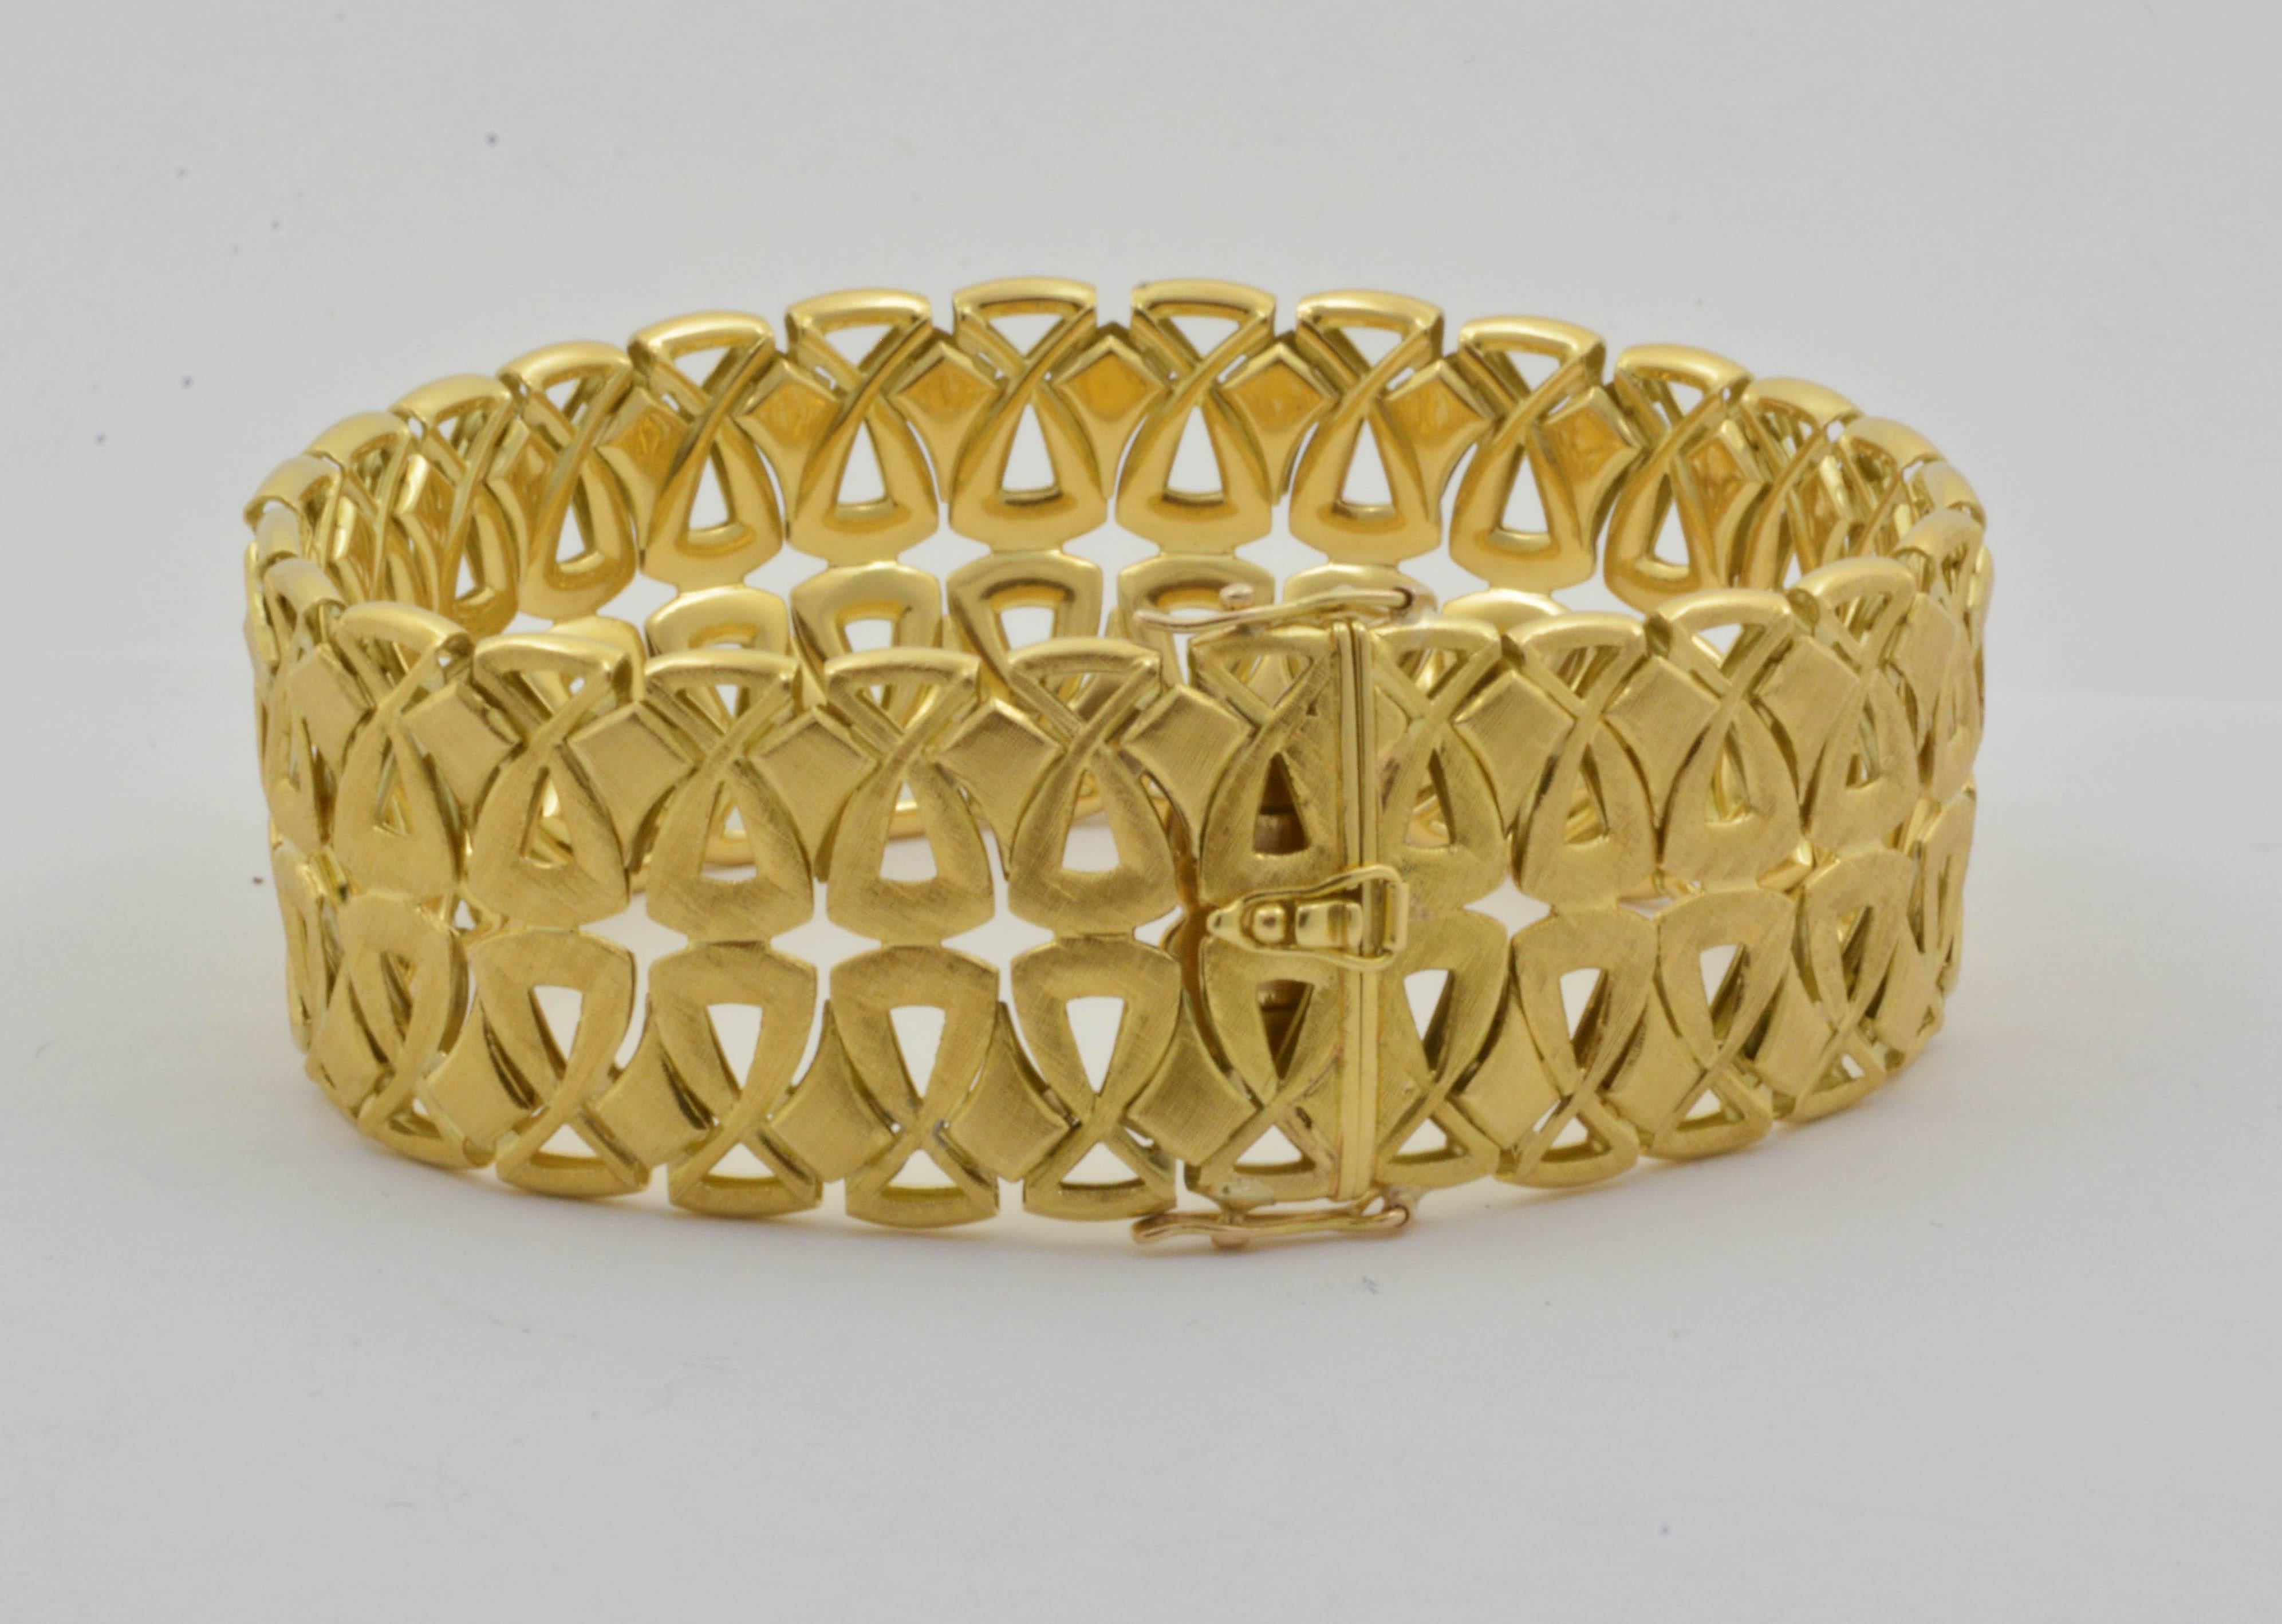 The 1980s era is exquisitely portrayed in this 18kt yellow gold bracelet. A double figure-eight pattern is separated by diamond shaped sections, giving this bracelet a unique design unlikely to be matched. Measuring at 24.3mm wide, the bracelet’s